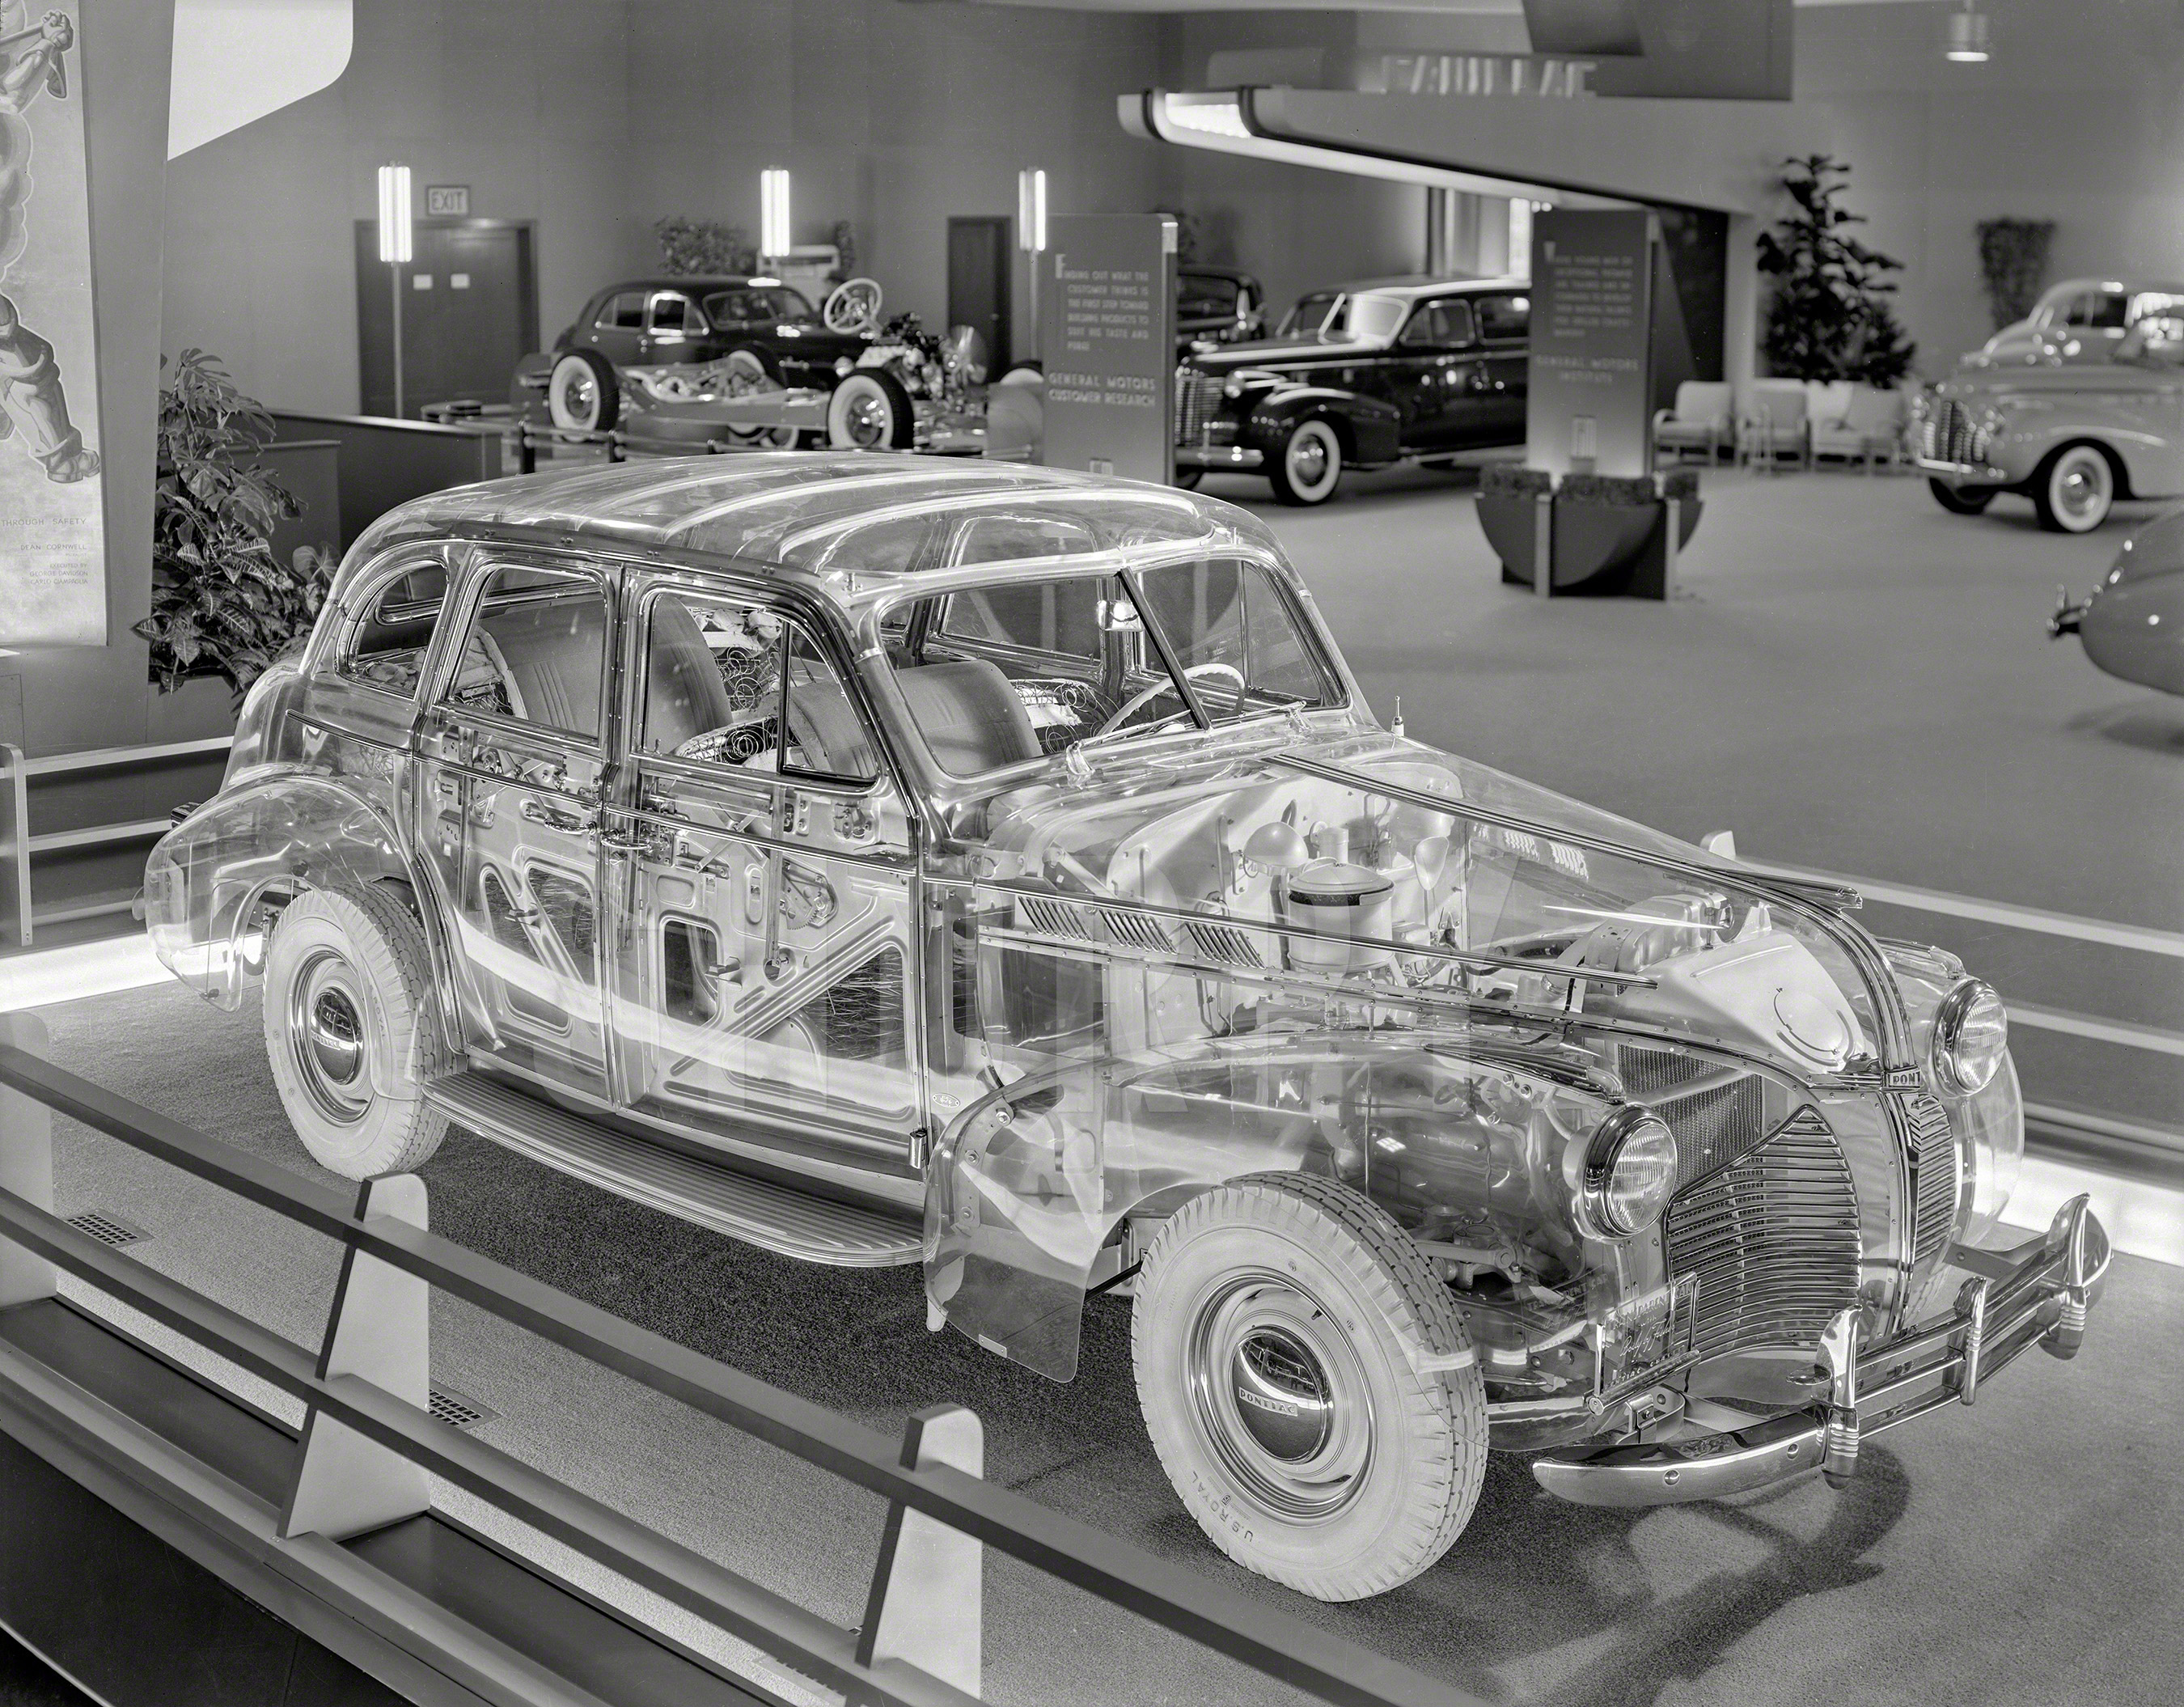 Pontiac Deluxe Six "Ghost Car" - June 11, 1940. General Motors exhibit at Golden Gate International Exposition, San Francisco. Transparent Car with Pontiac Chassis and Body by Fisher.